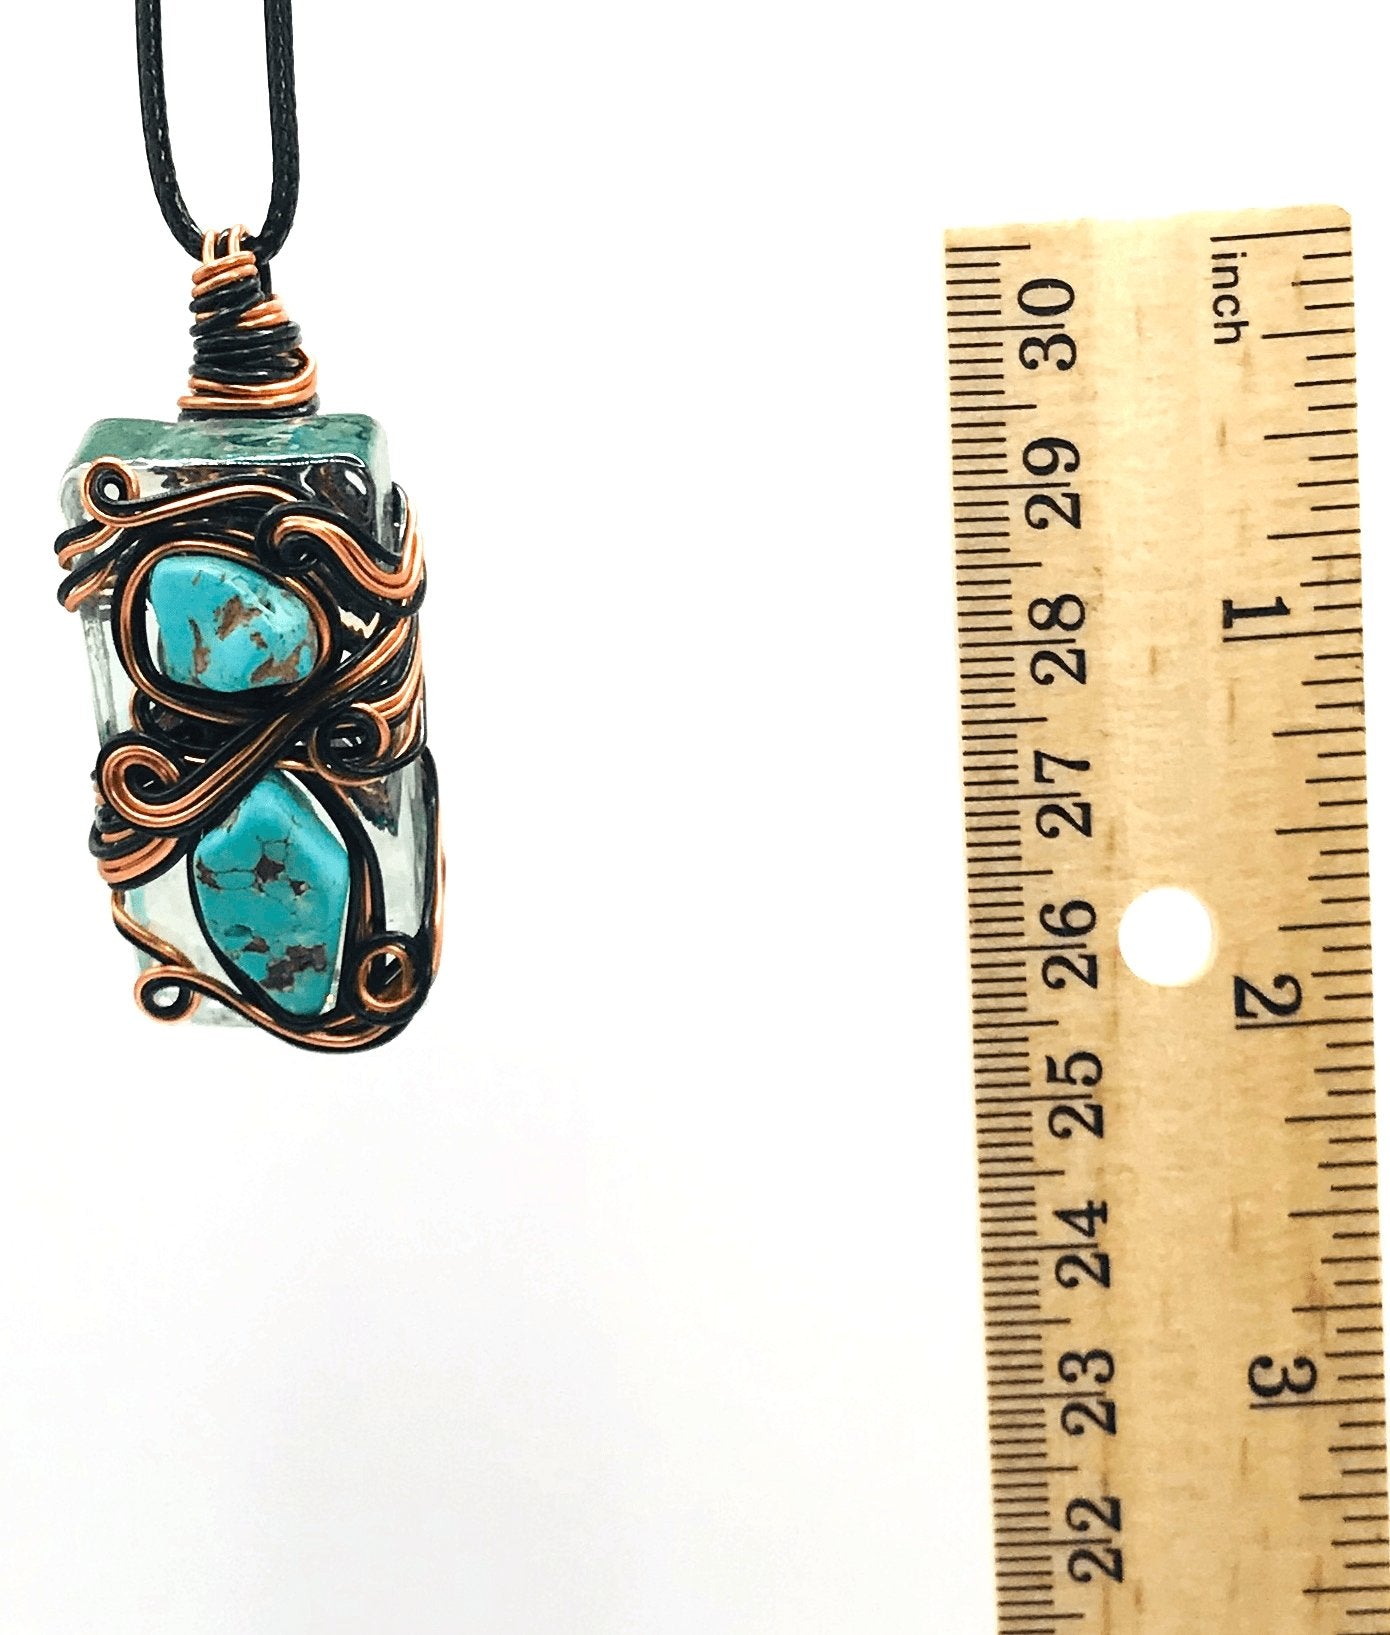 Rock & Glass Turquoise Wagnerite Copper and Black Medium 1 1/2-2 inch Pendant - Sunshine & Goldie